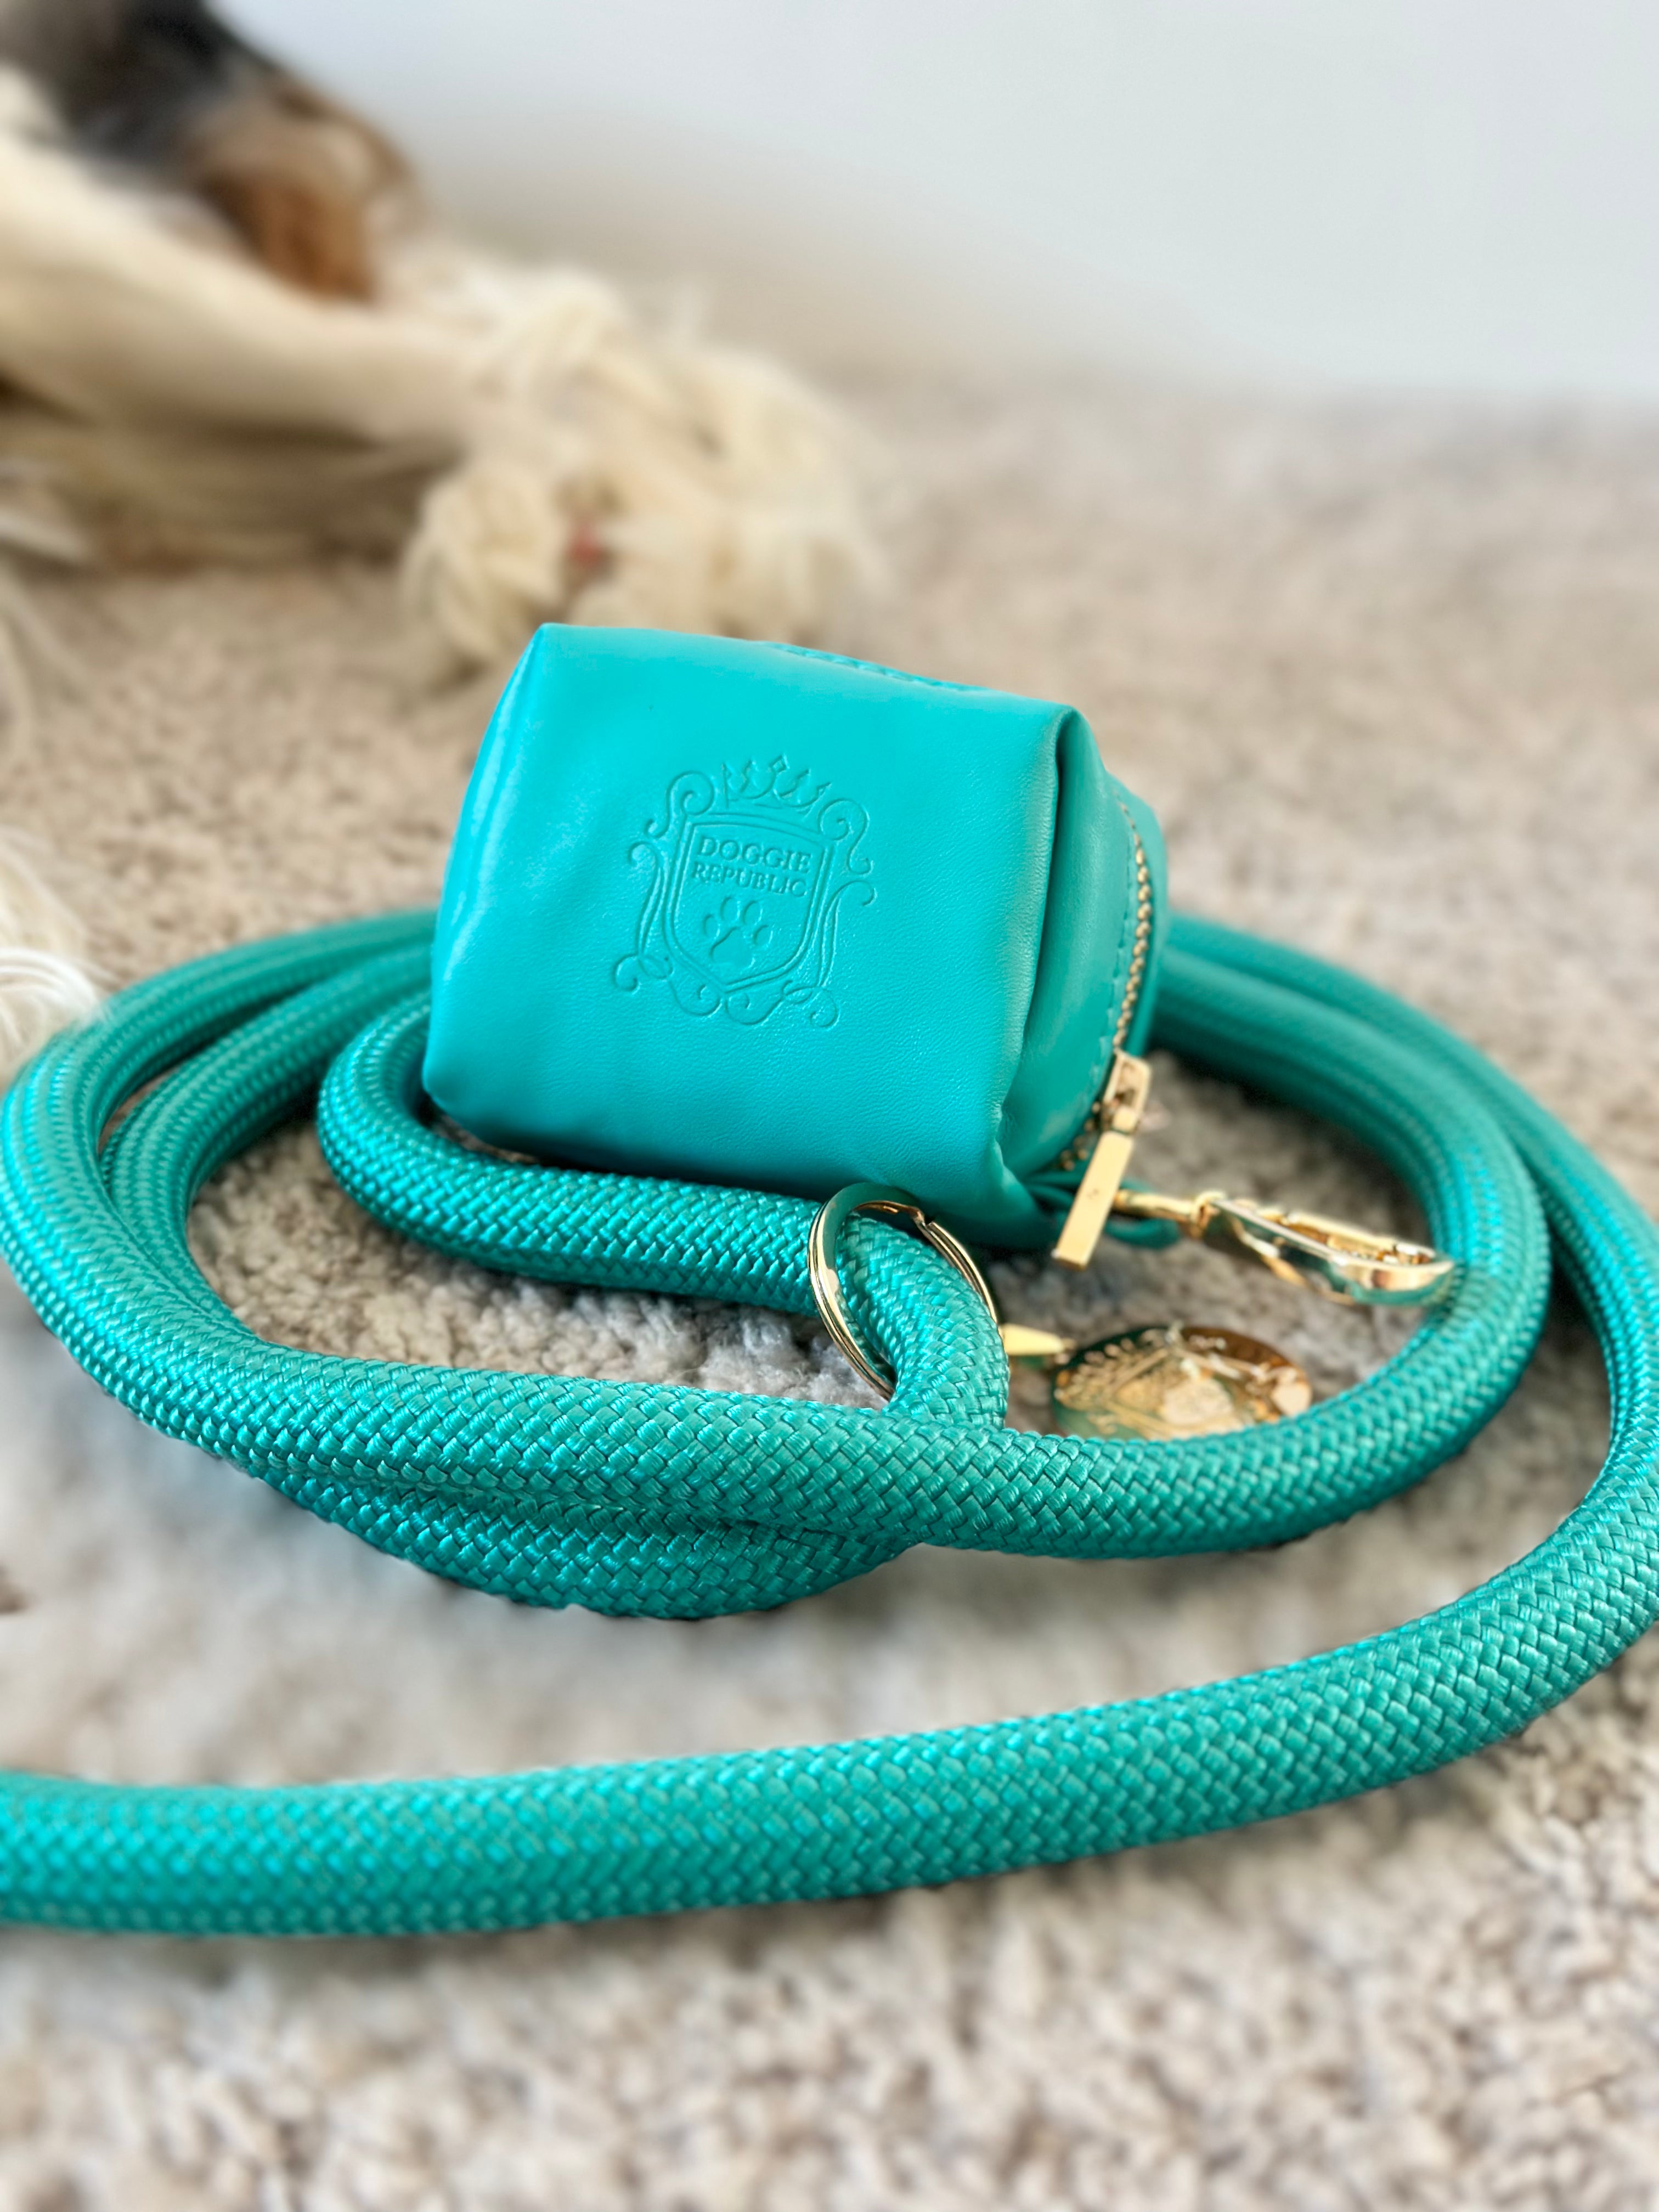 The Classic Waste Bag Holder - Caribbean Teal